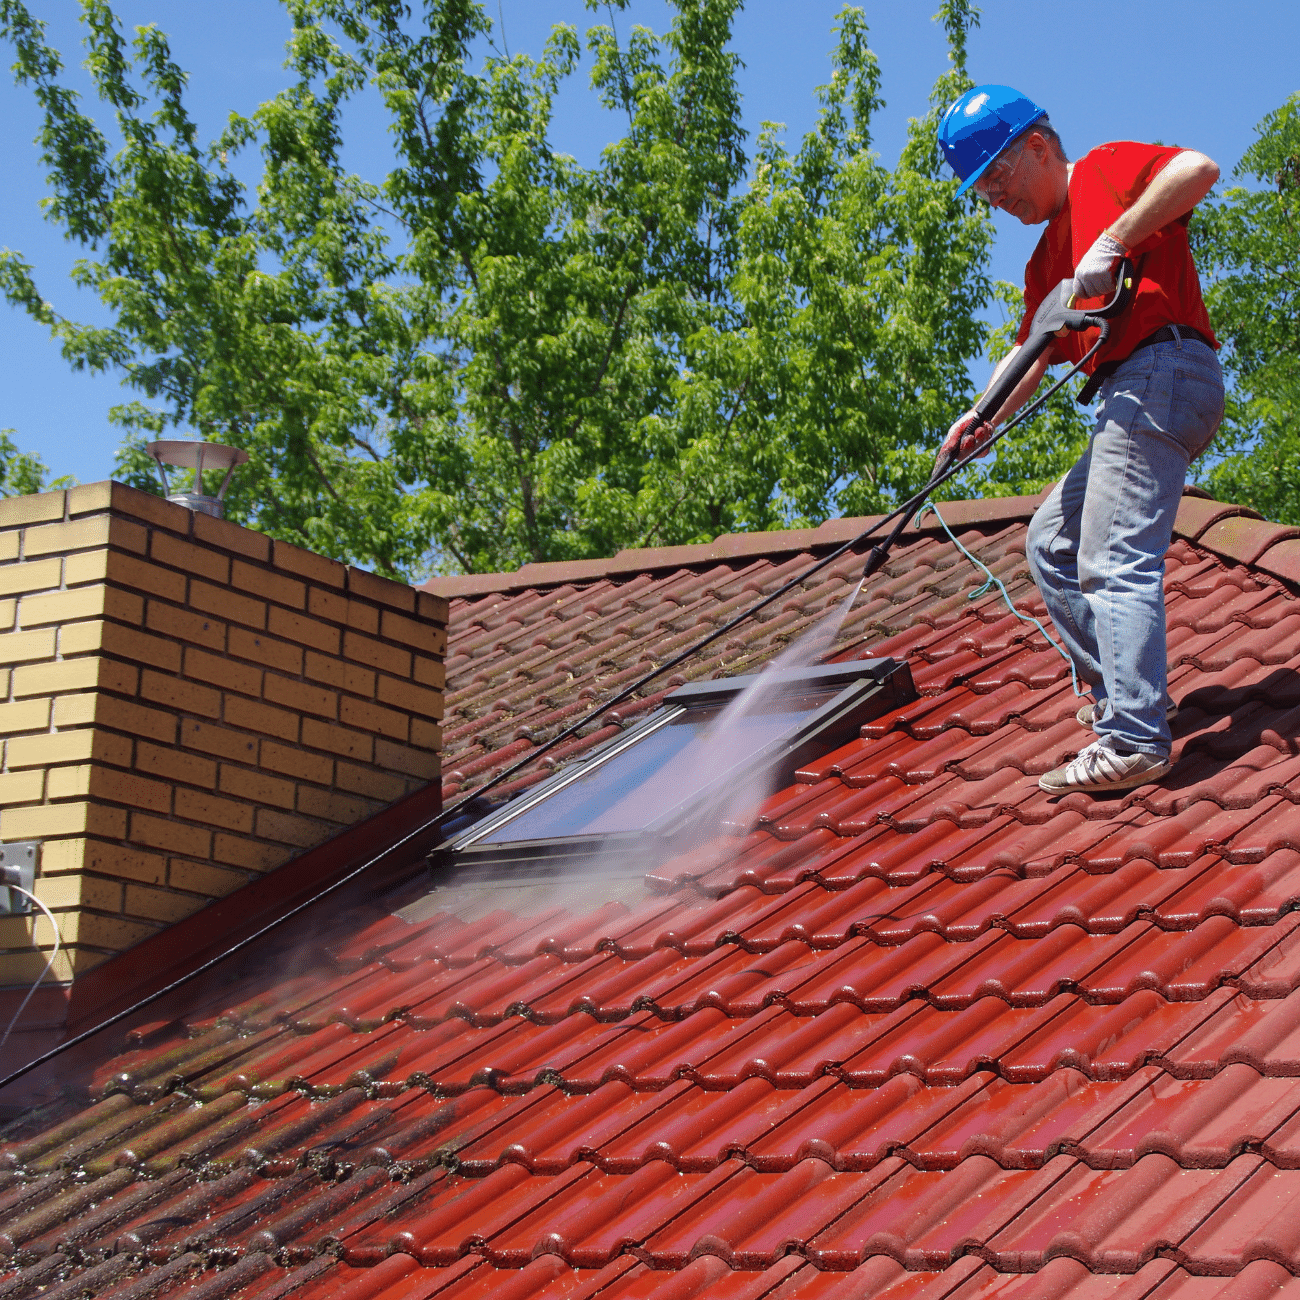 Worker cleaning a tile roof